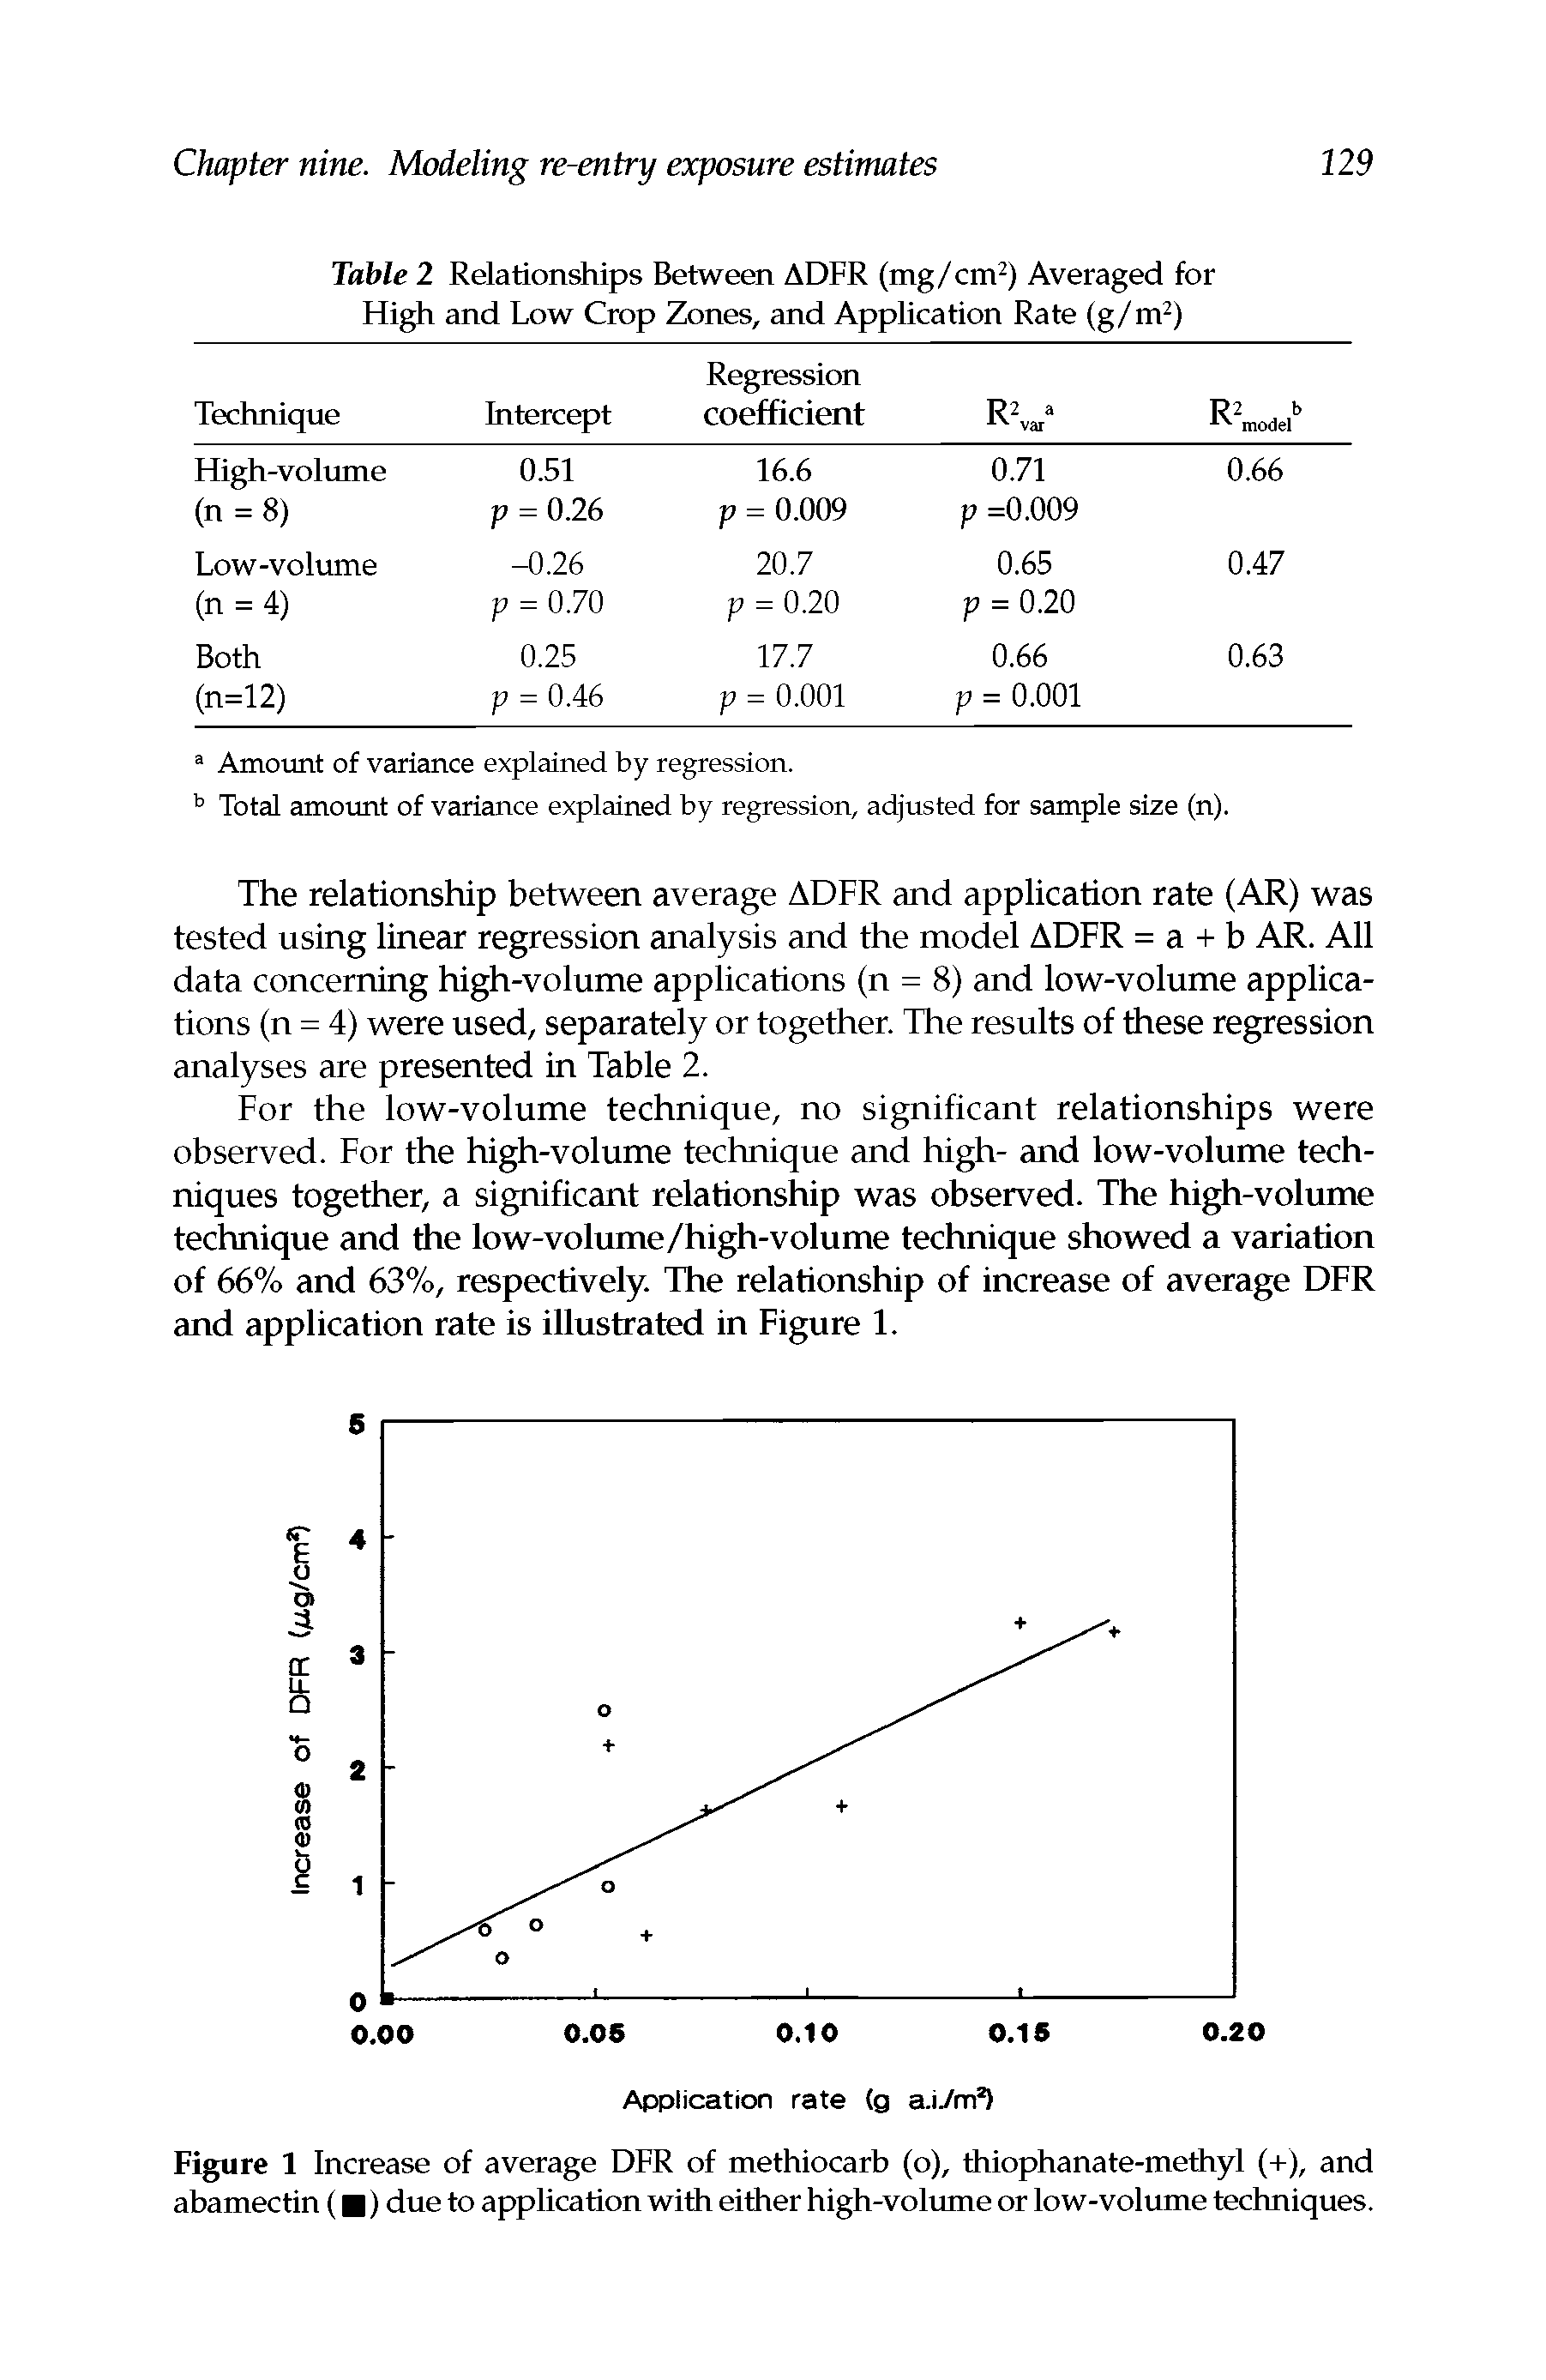 Figure 1 Increase of average DFR of methiocarb (o), thiophanate-methyl (+), and abamectin ( ) due to application with either high-volume or low-volume techniques.